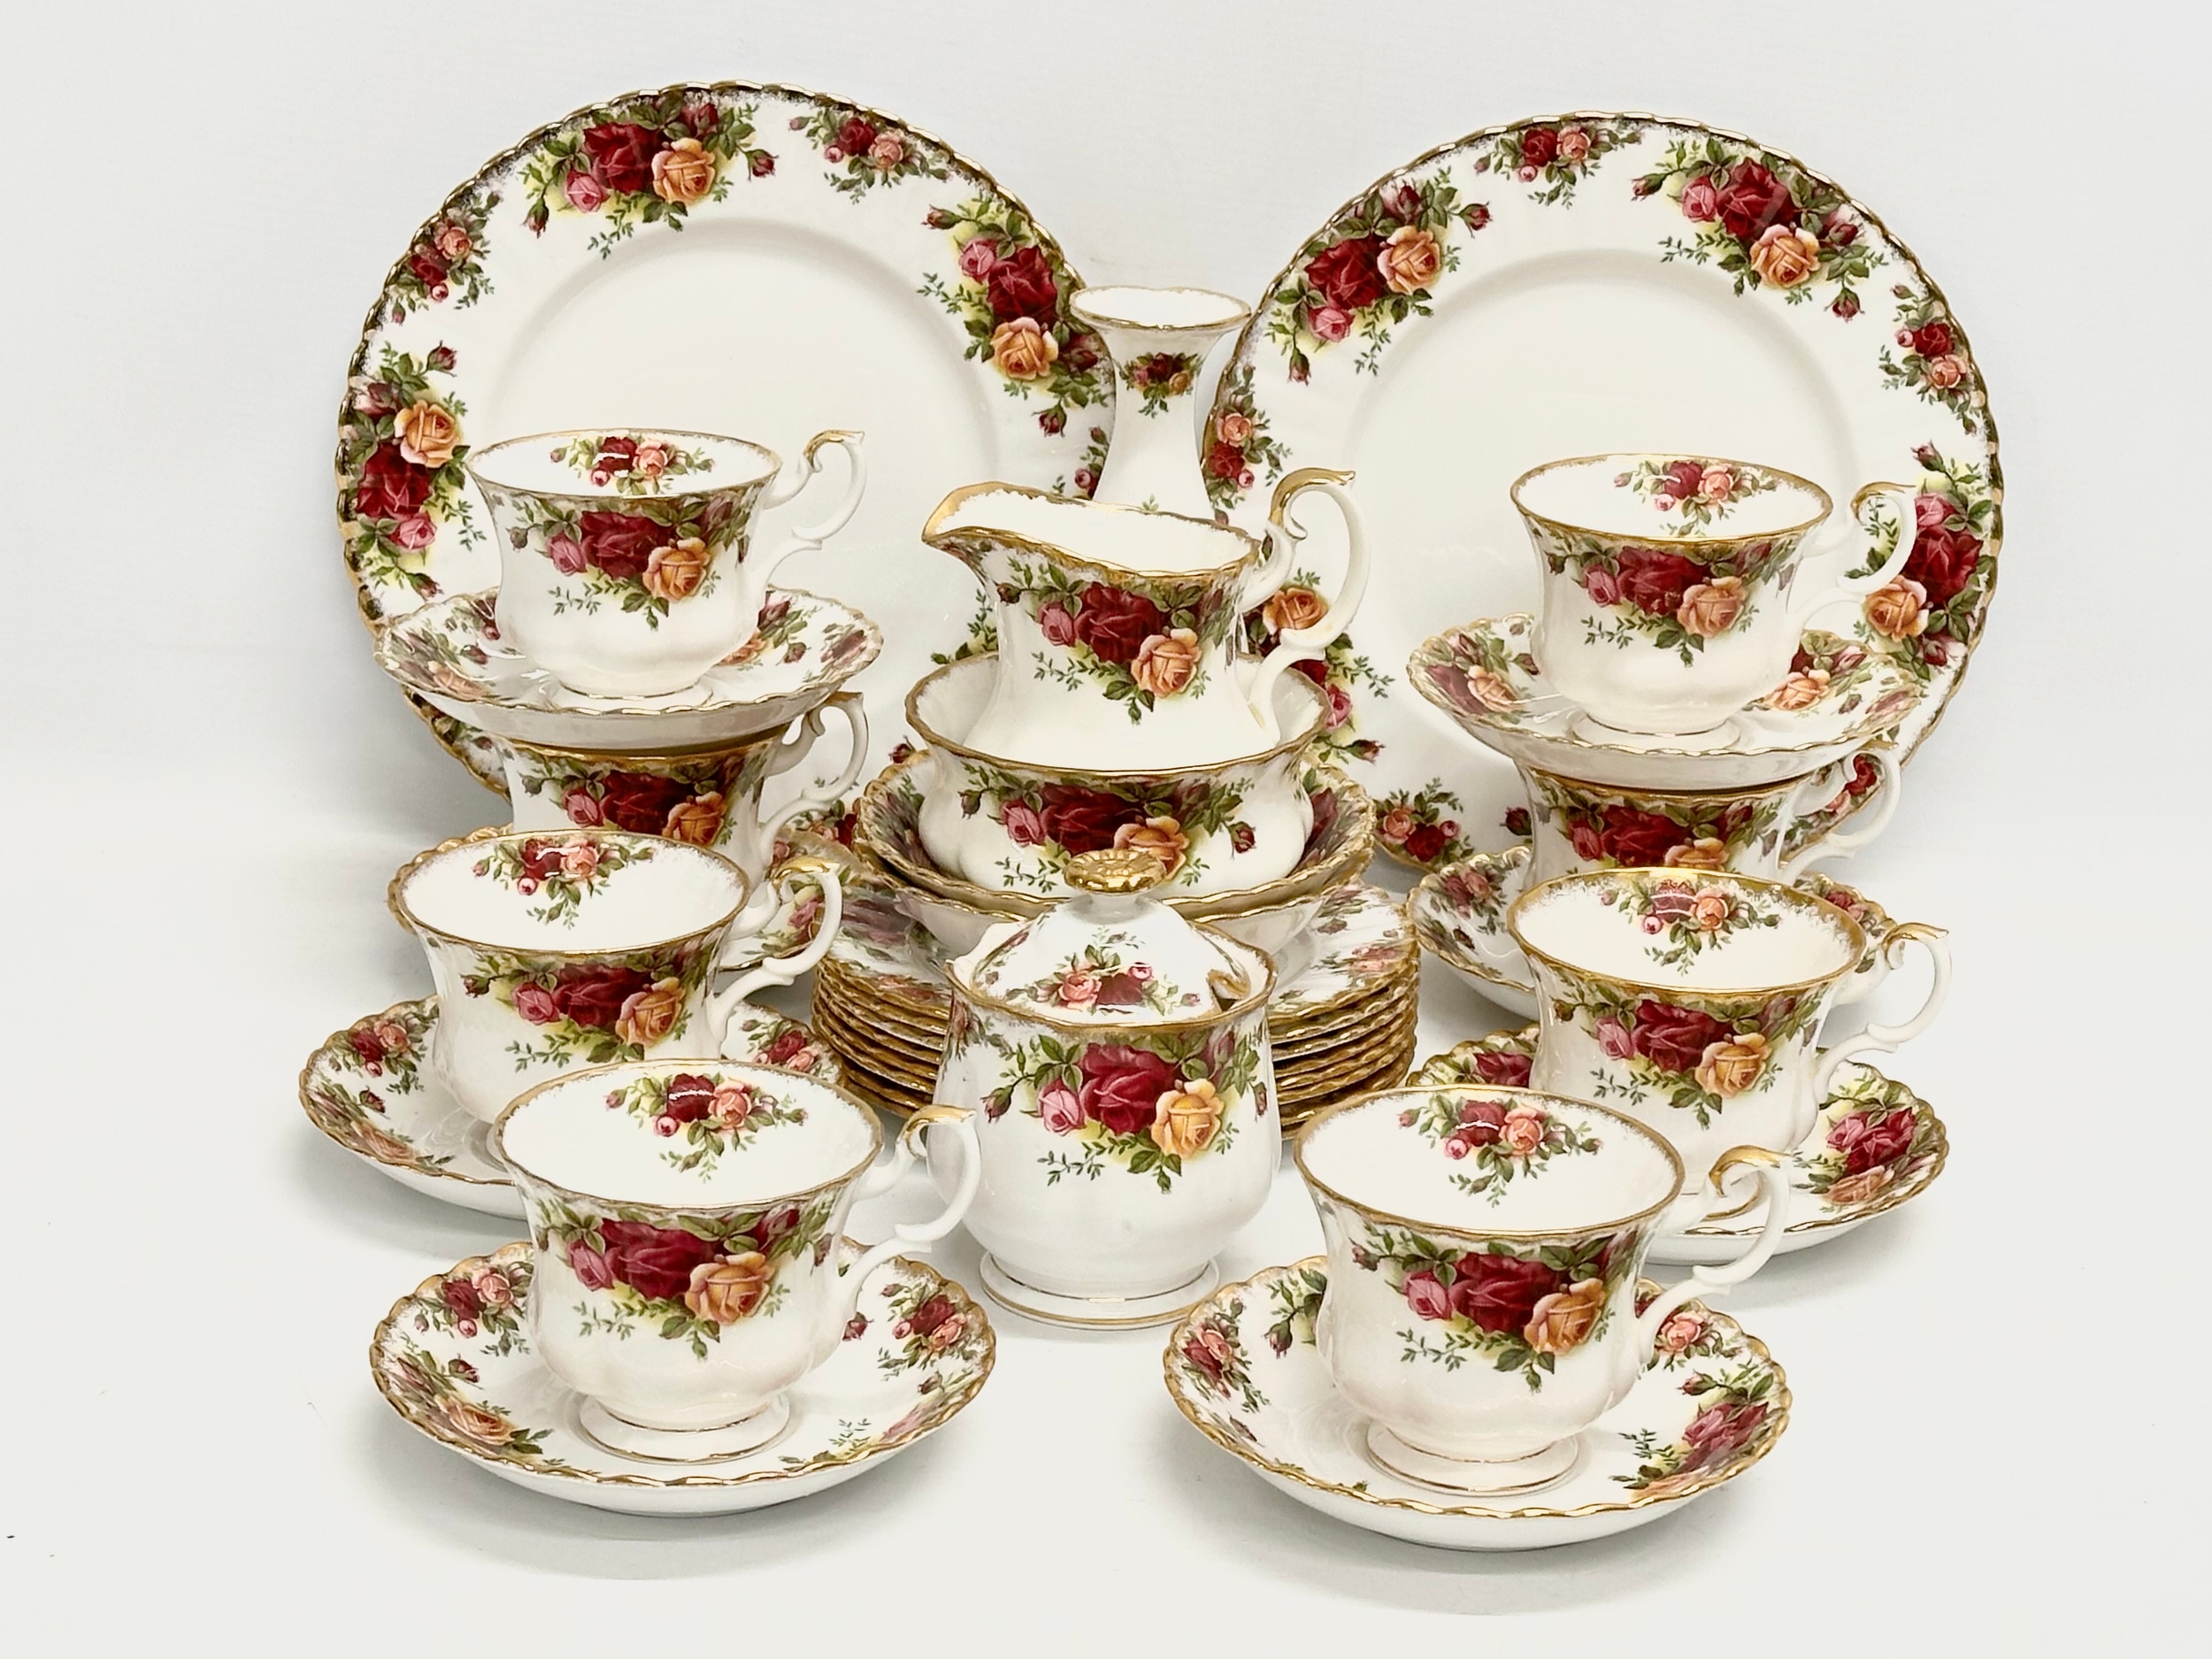 32 piece of Royal Albert ‘Old Country Roses’ tea service. 2 salad plates, a vase, sugar bowl with